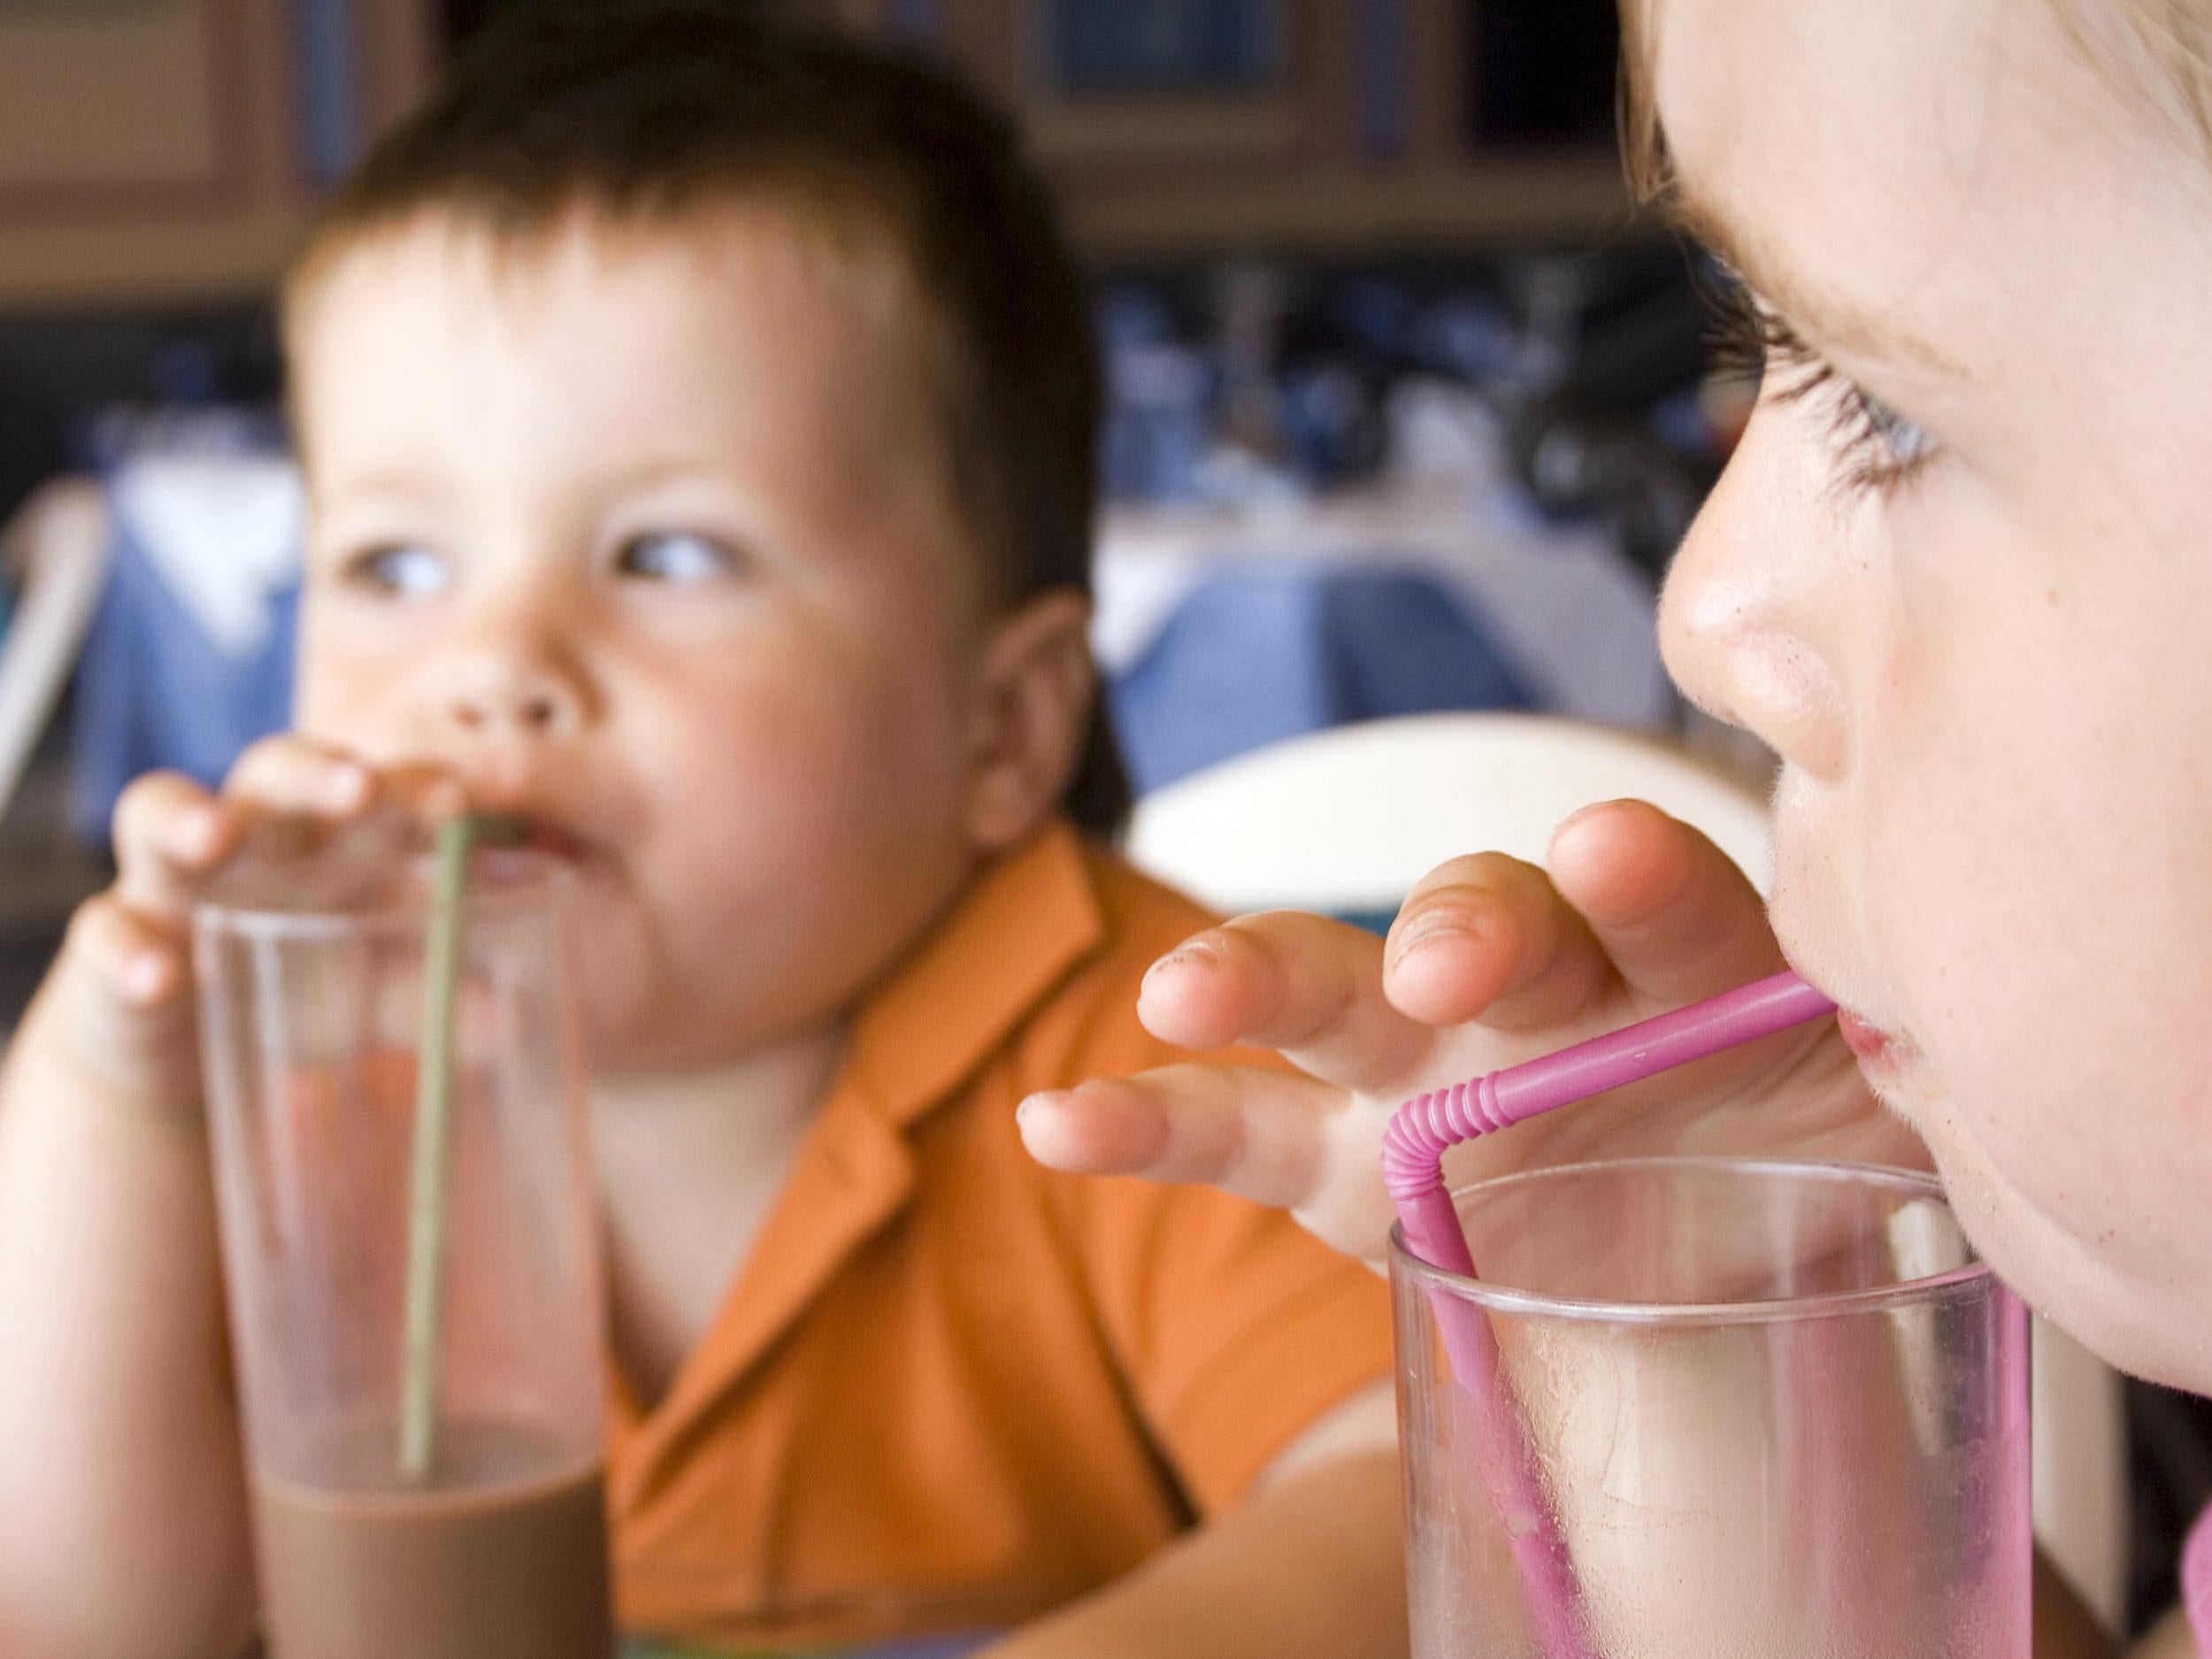 A 300ml container of milkshake contains around 11g of protein